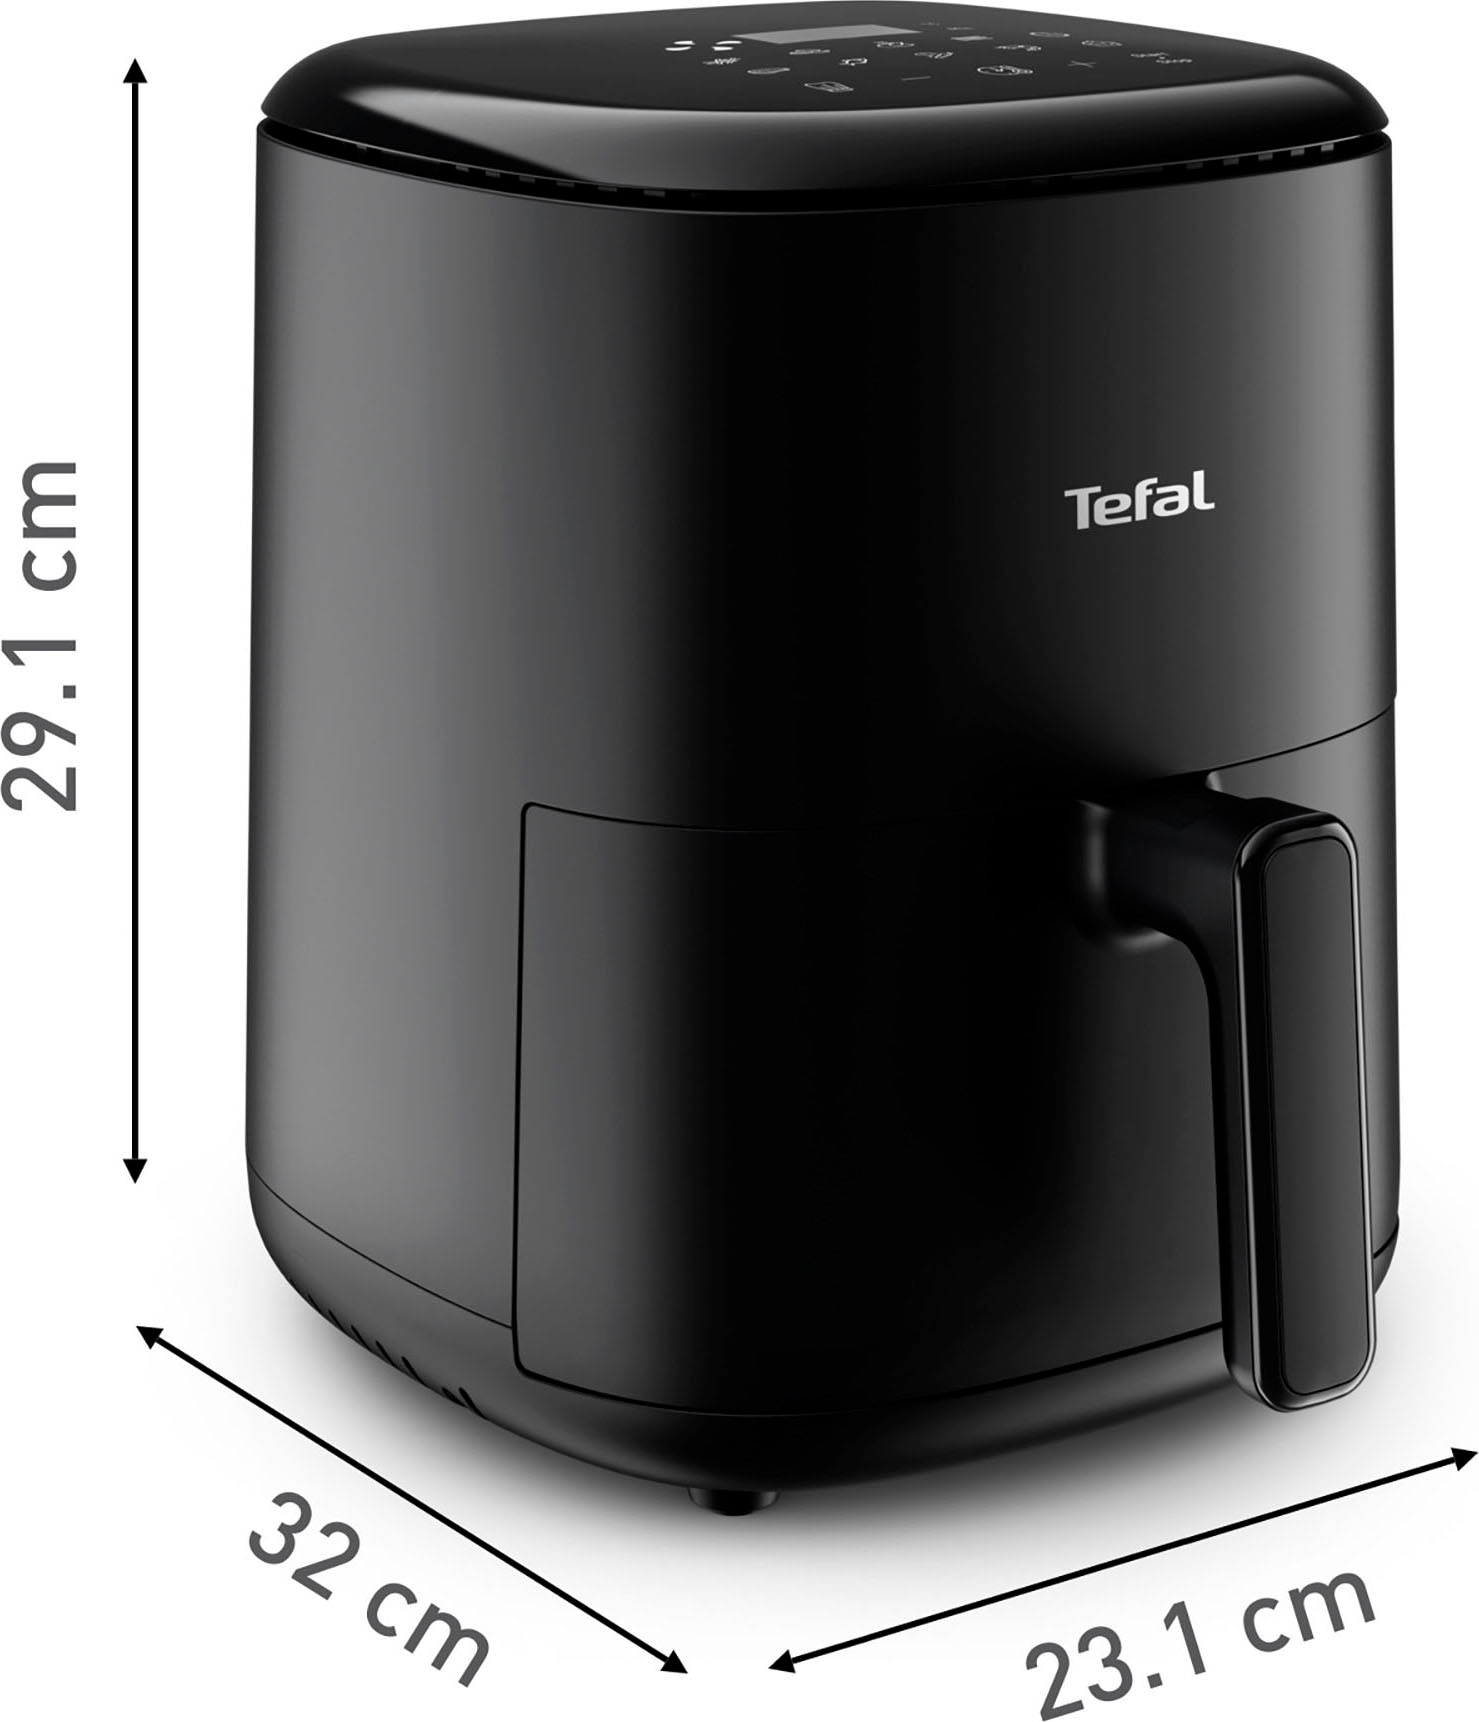 Heißluftfritteuse Tefal Online W Easy »EY1458 OTTO Compact«, Fry Shop 1300 im